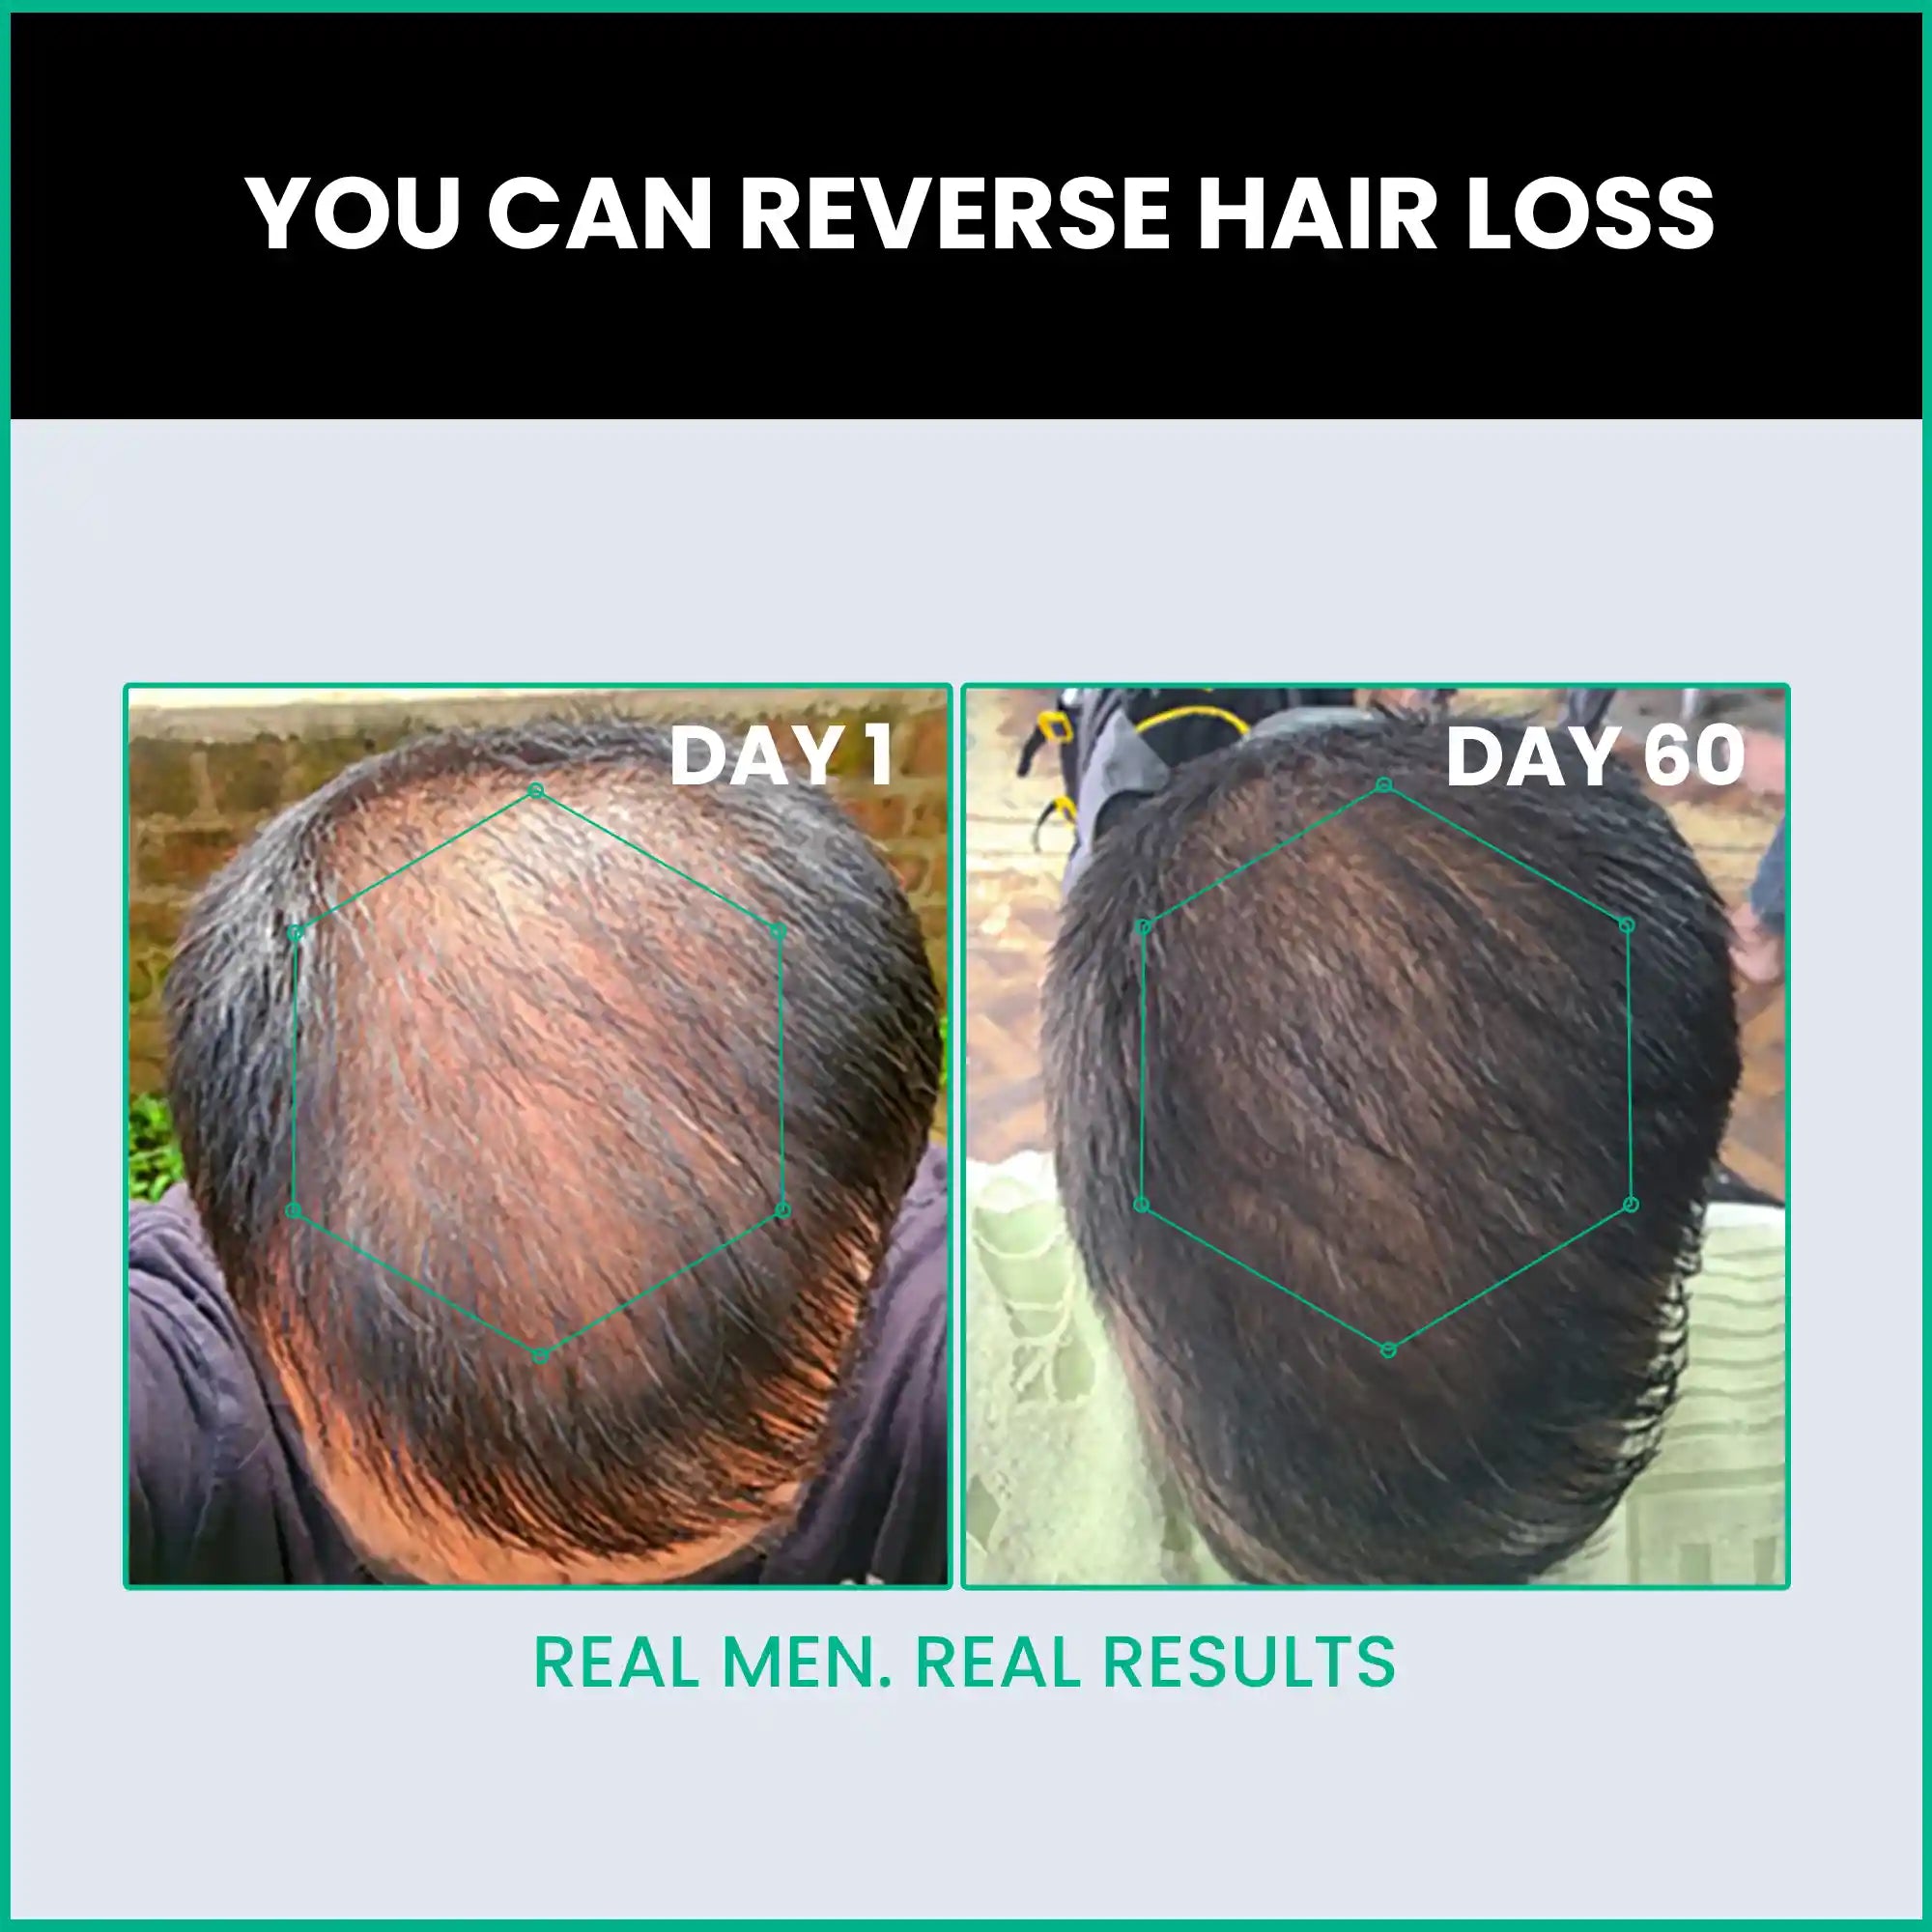 reverse hair loss in 60 days with hair growth serum for men